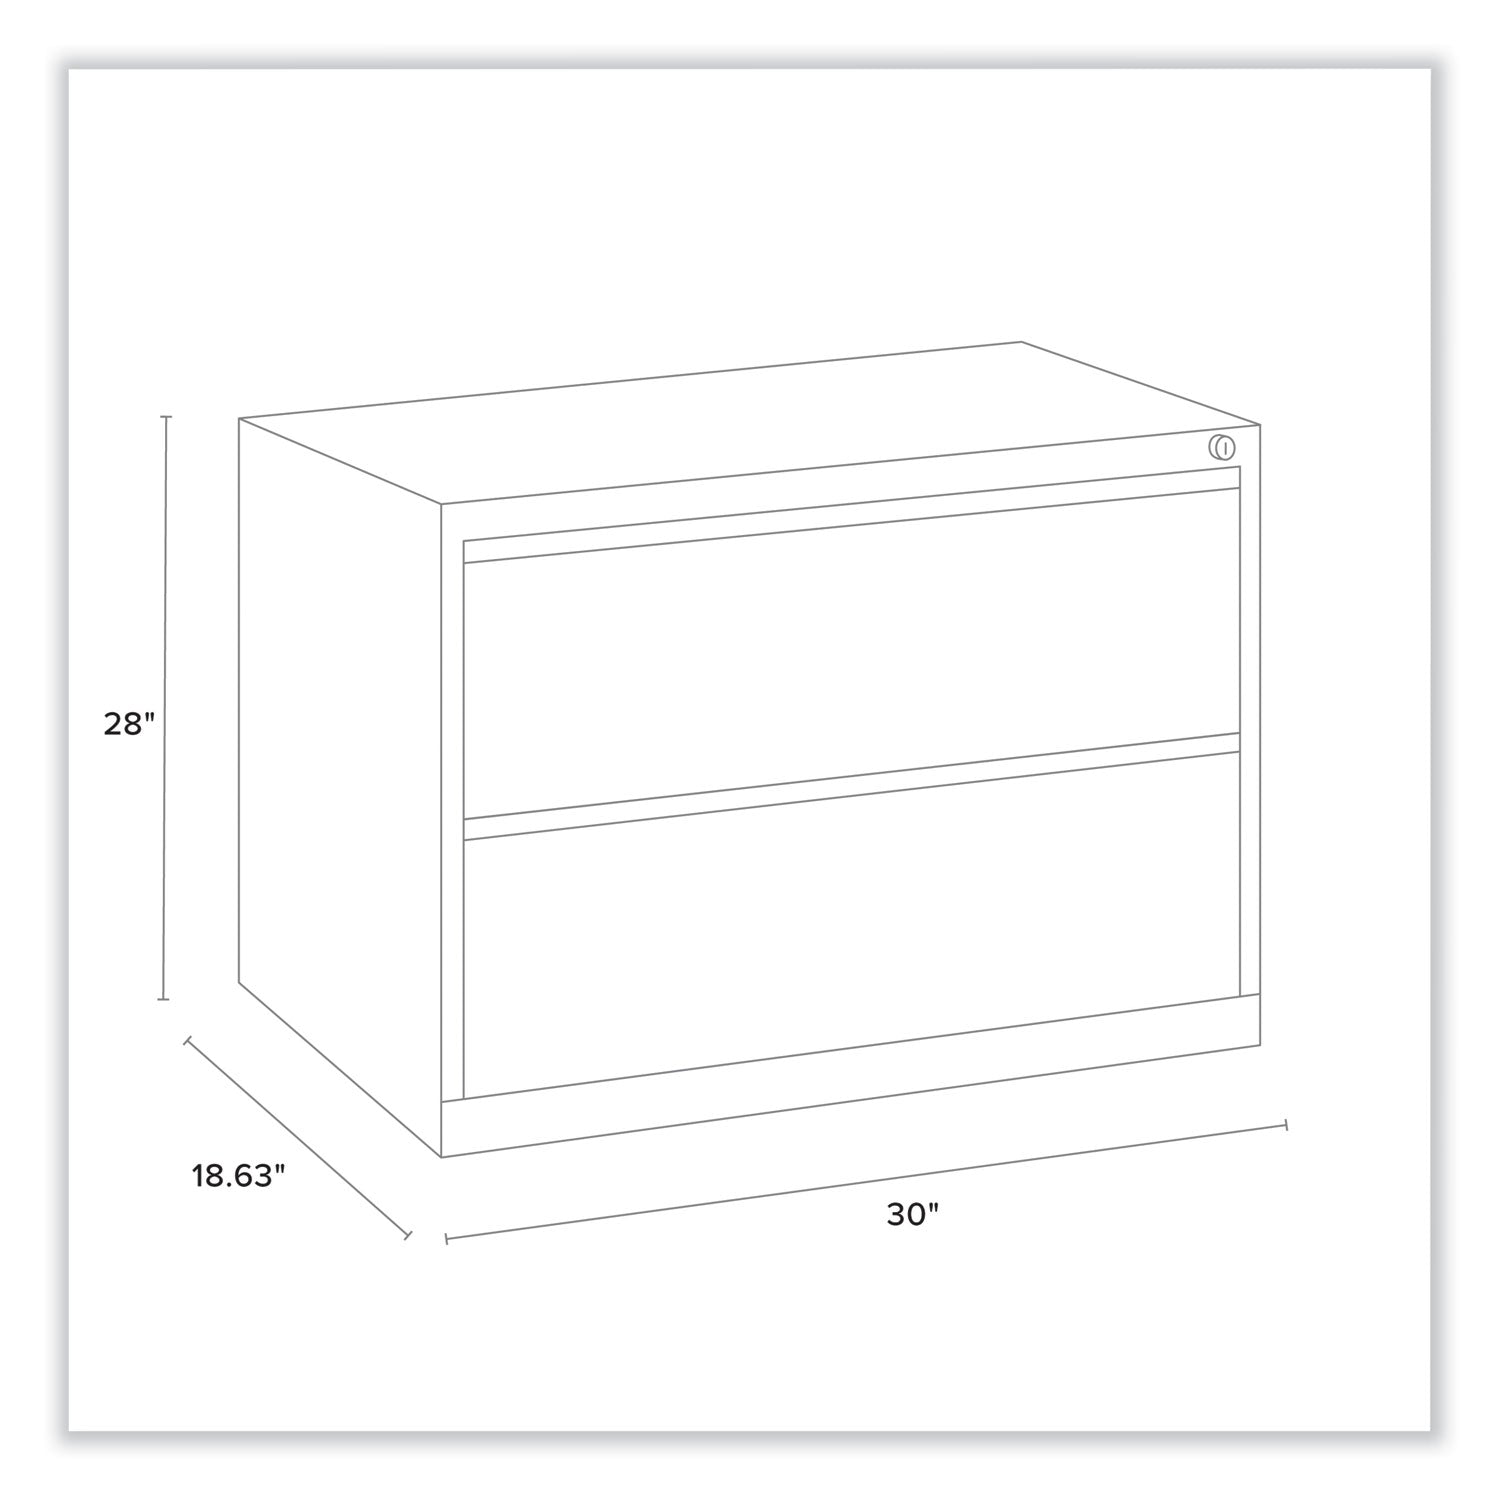 lateral-file-2-legal-letter-size-file-drawers-putty-30-x-1863-x-28_alehlf3029py - 7